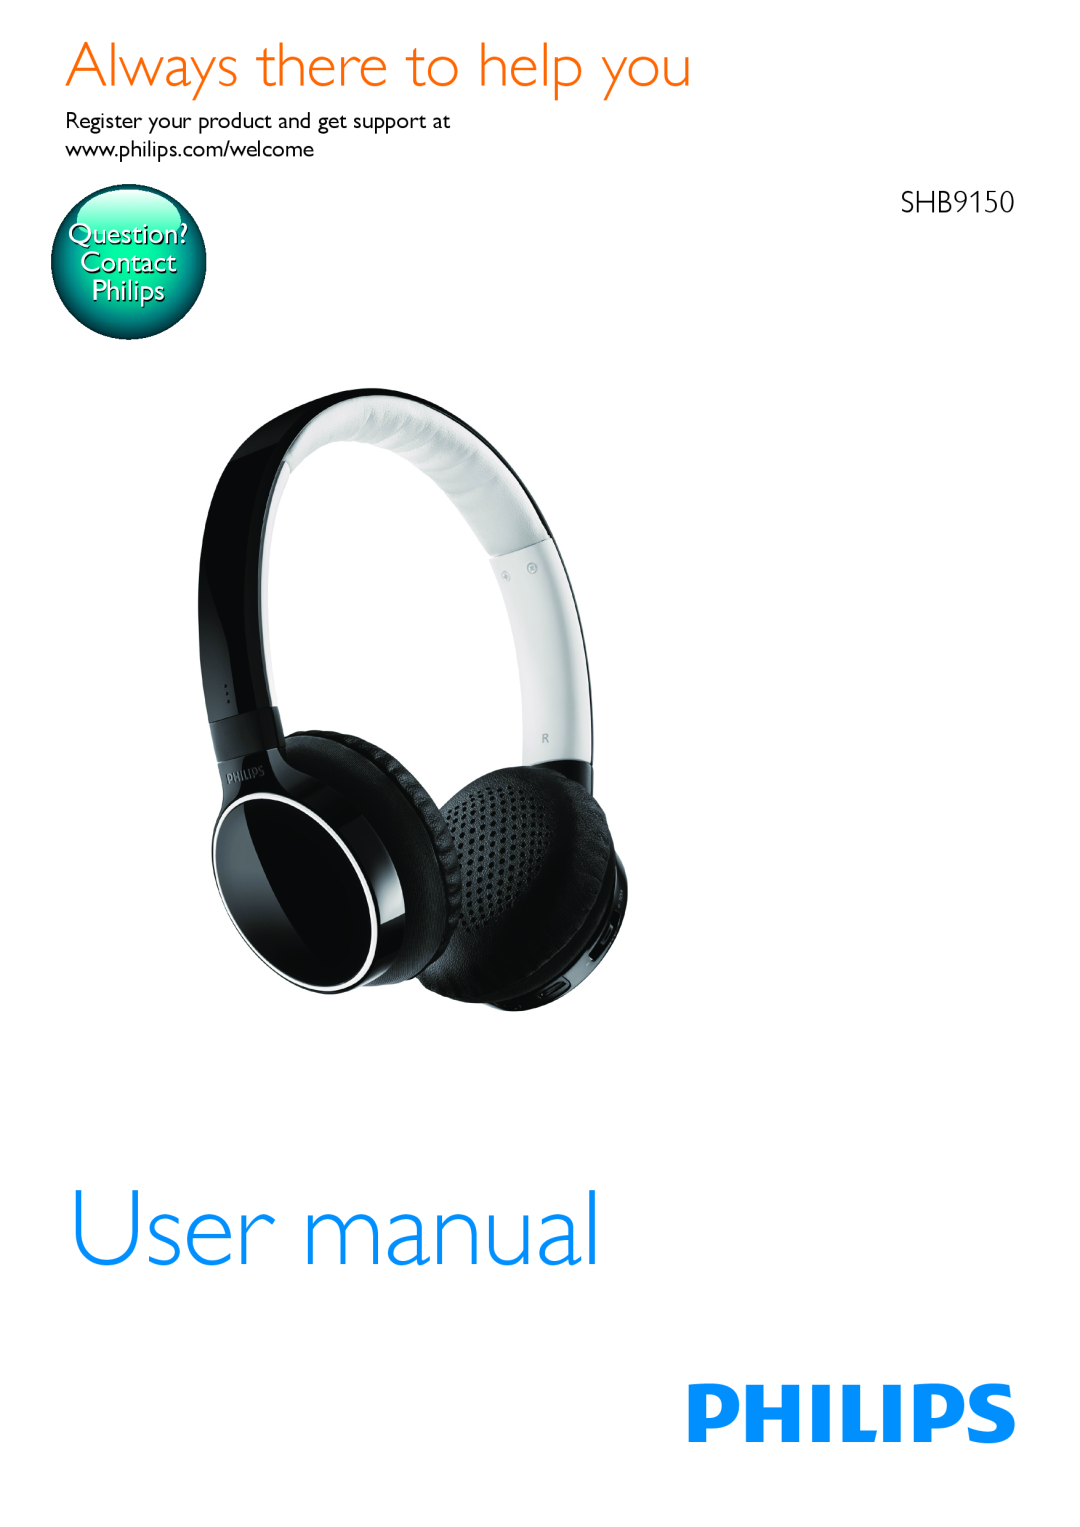 Philips SHB9150 user manual Always there to help you, Question? Contact Philips 